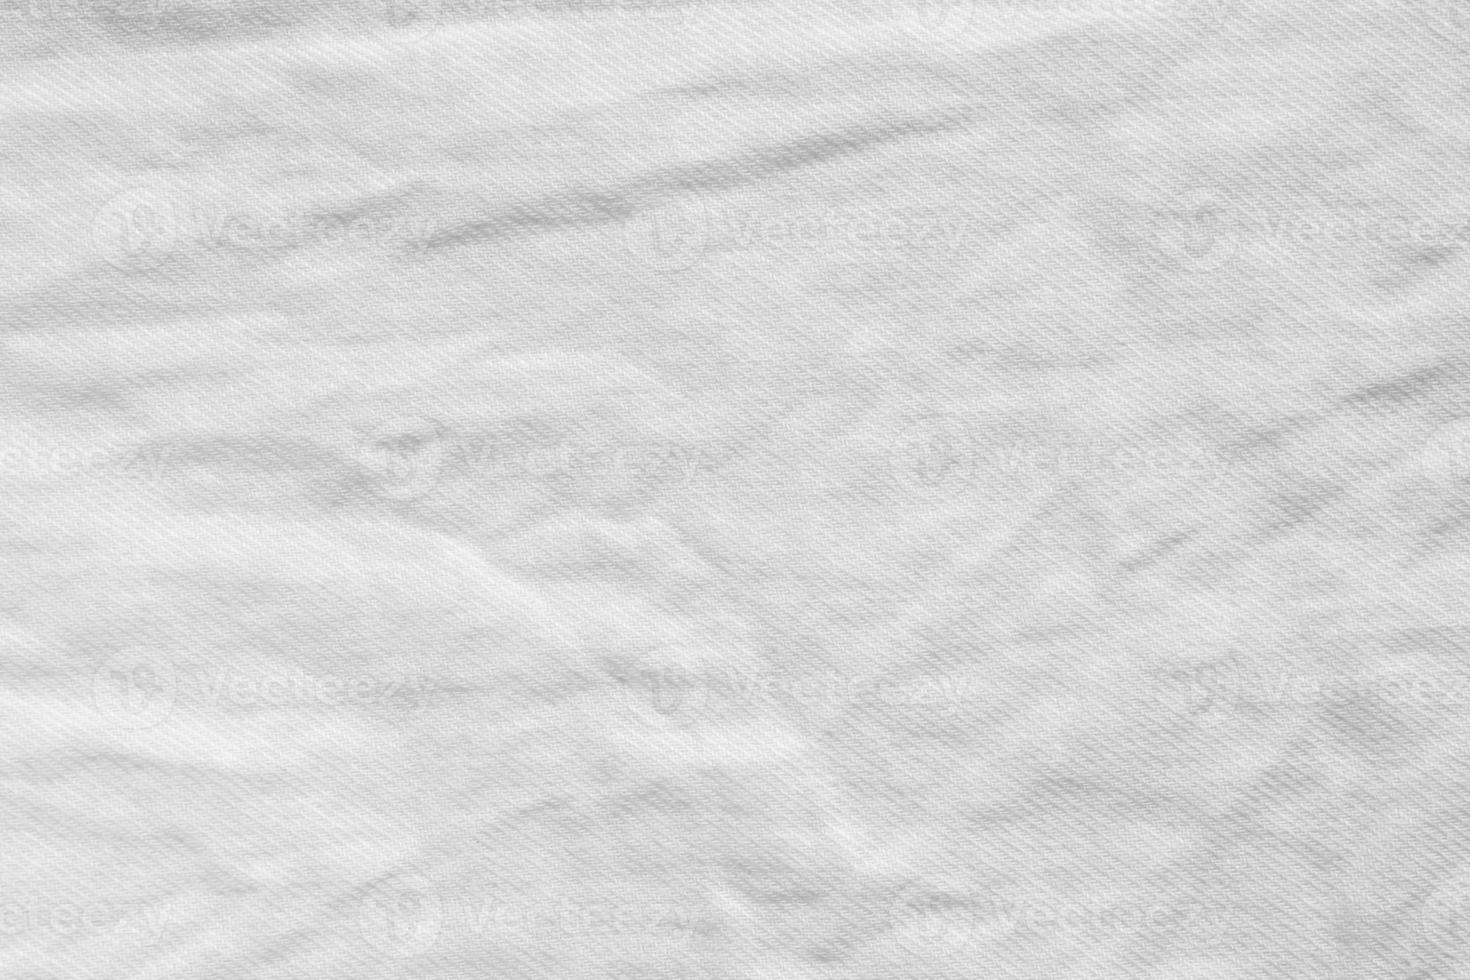 white wrinkle cotton shirt fabric cloth texture pattern background ...